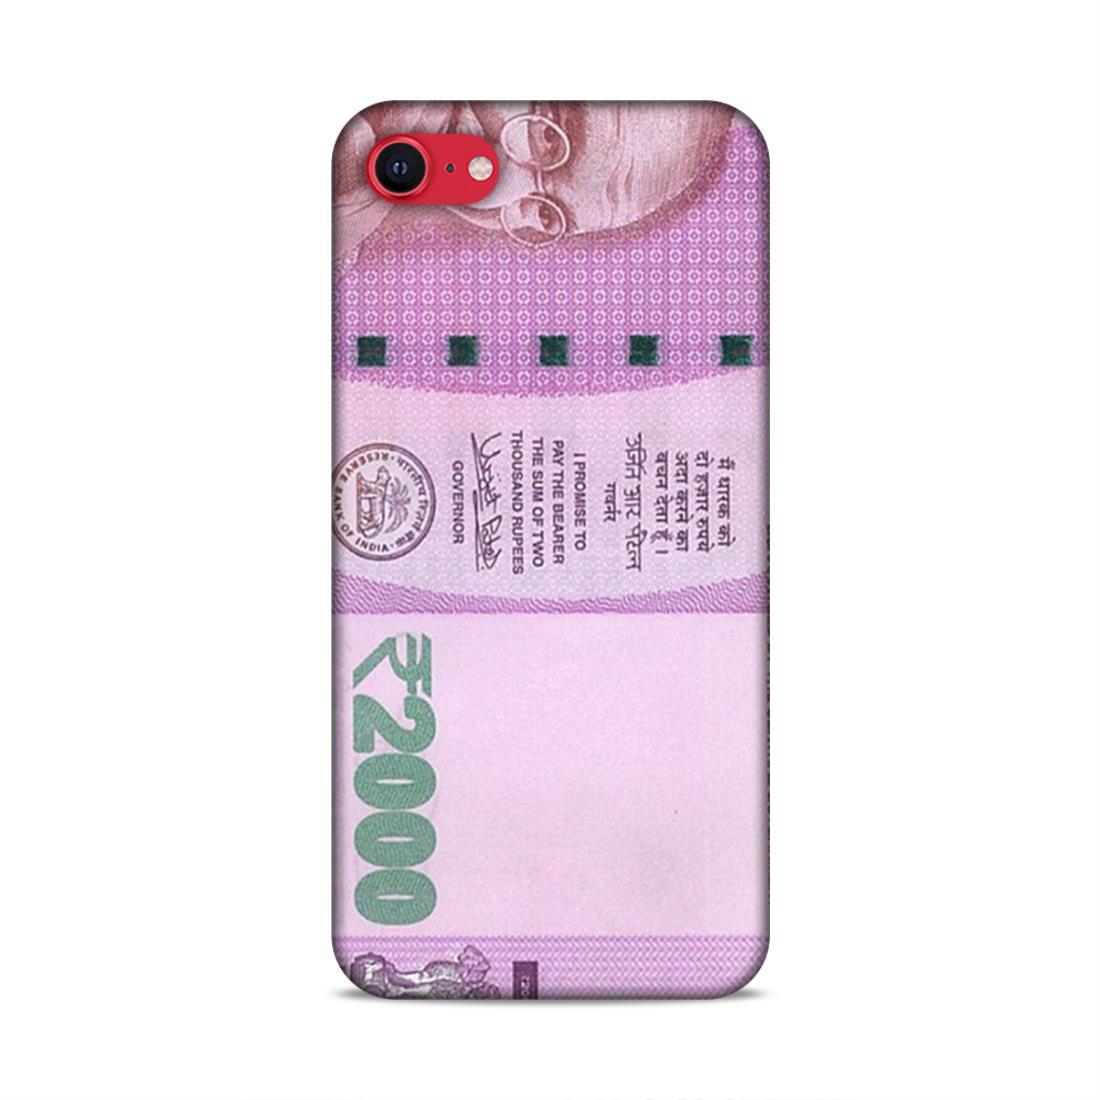 Rs 2000 Currency Note iPhone SE 2020 Phone Cover